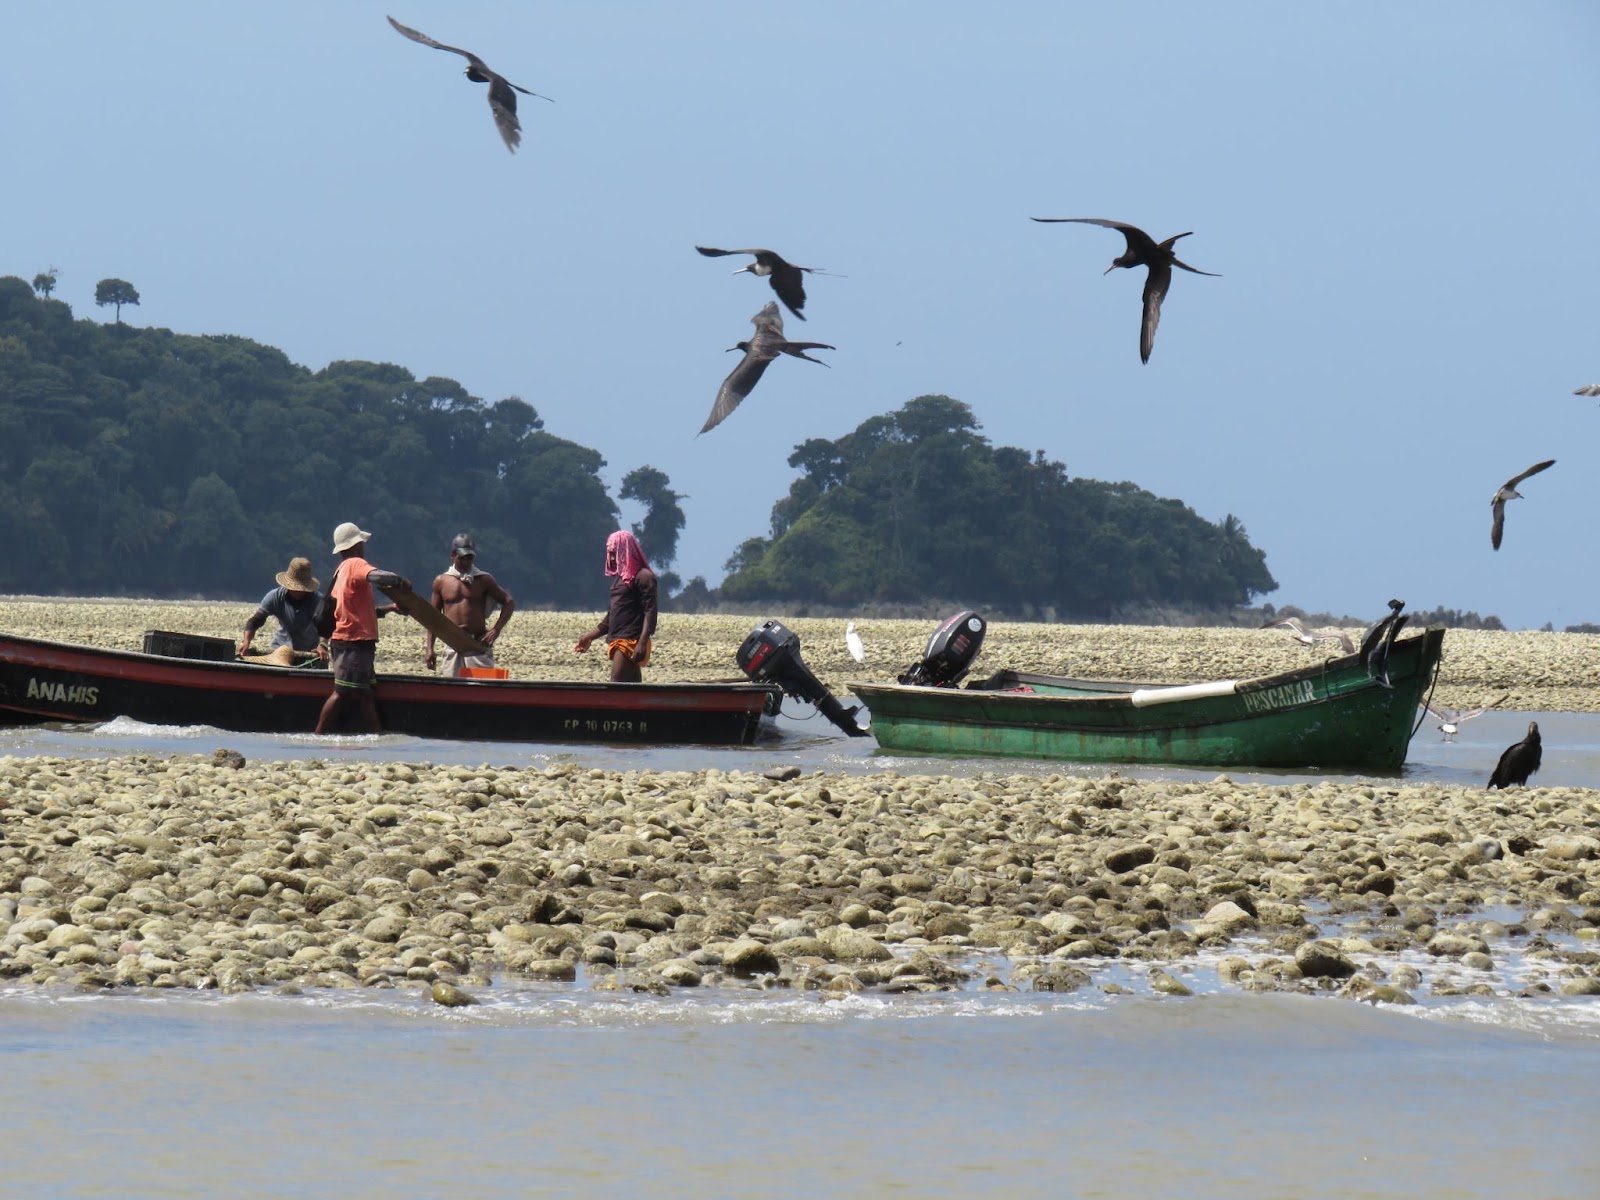 frigate birds flying above some fishermen in Choco, Colombia. 